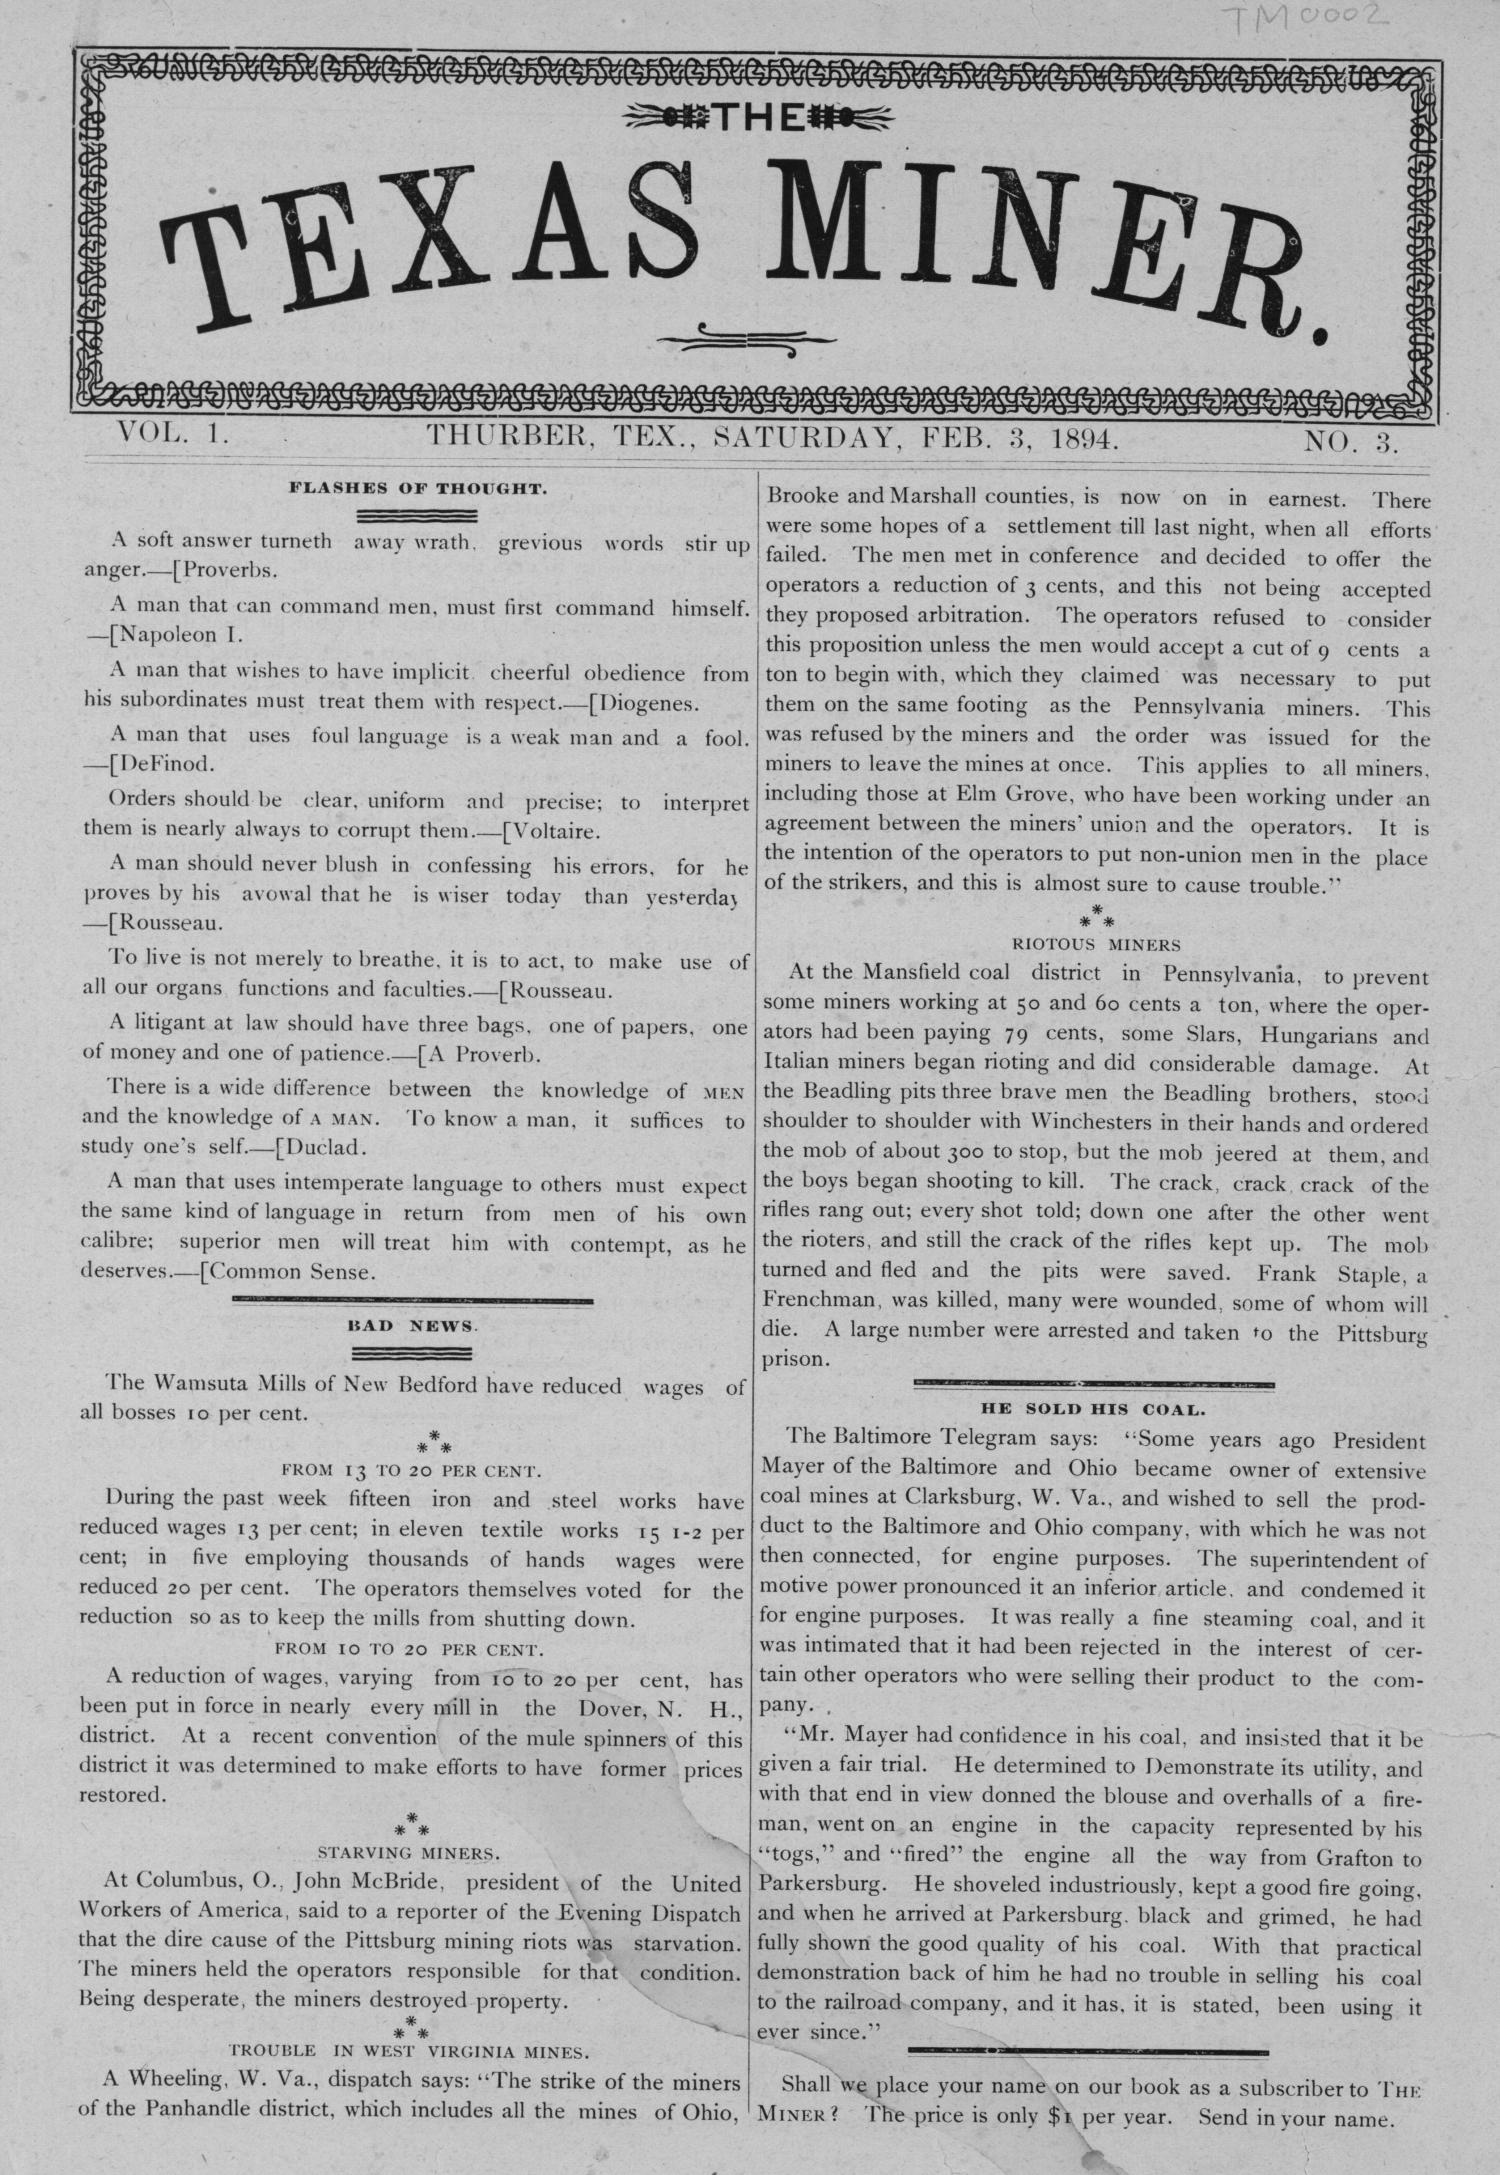 The Texas Miner, Volume 1, Number 3, February 3, 1894
                                                
                                                    1
                                                